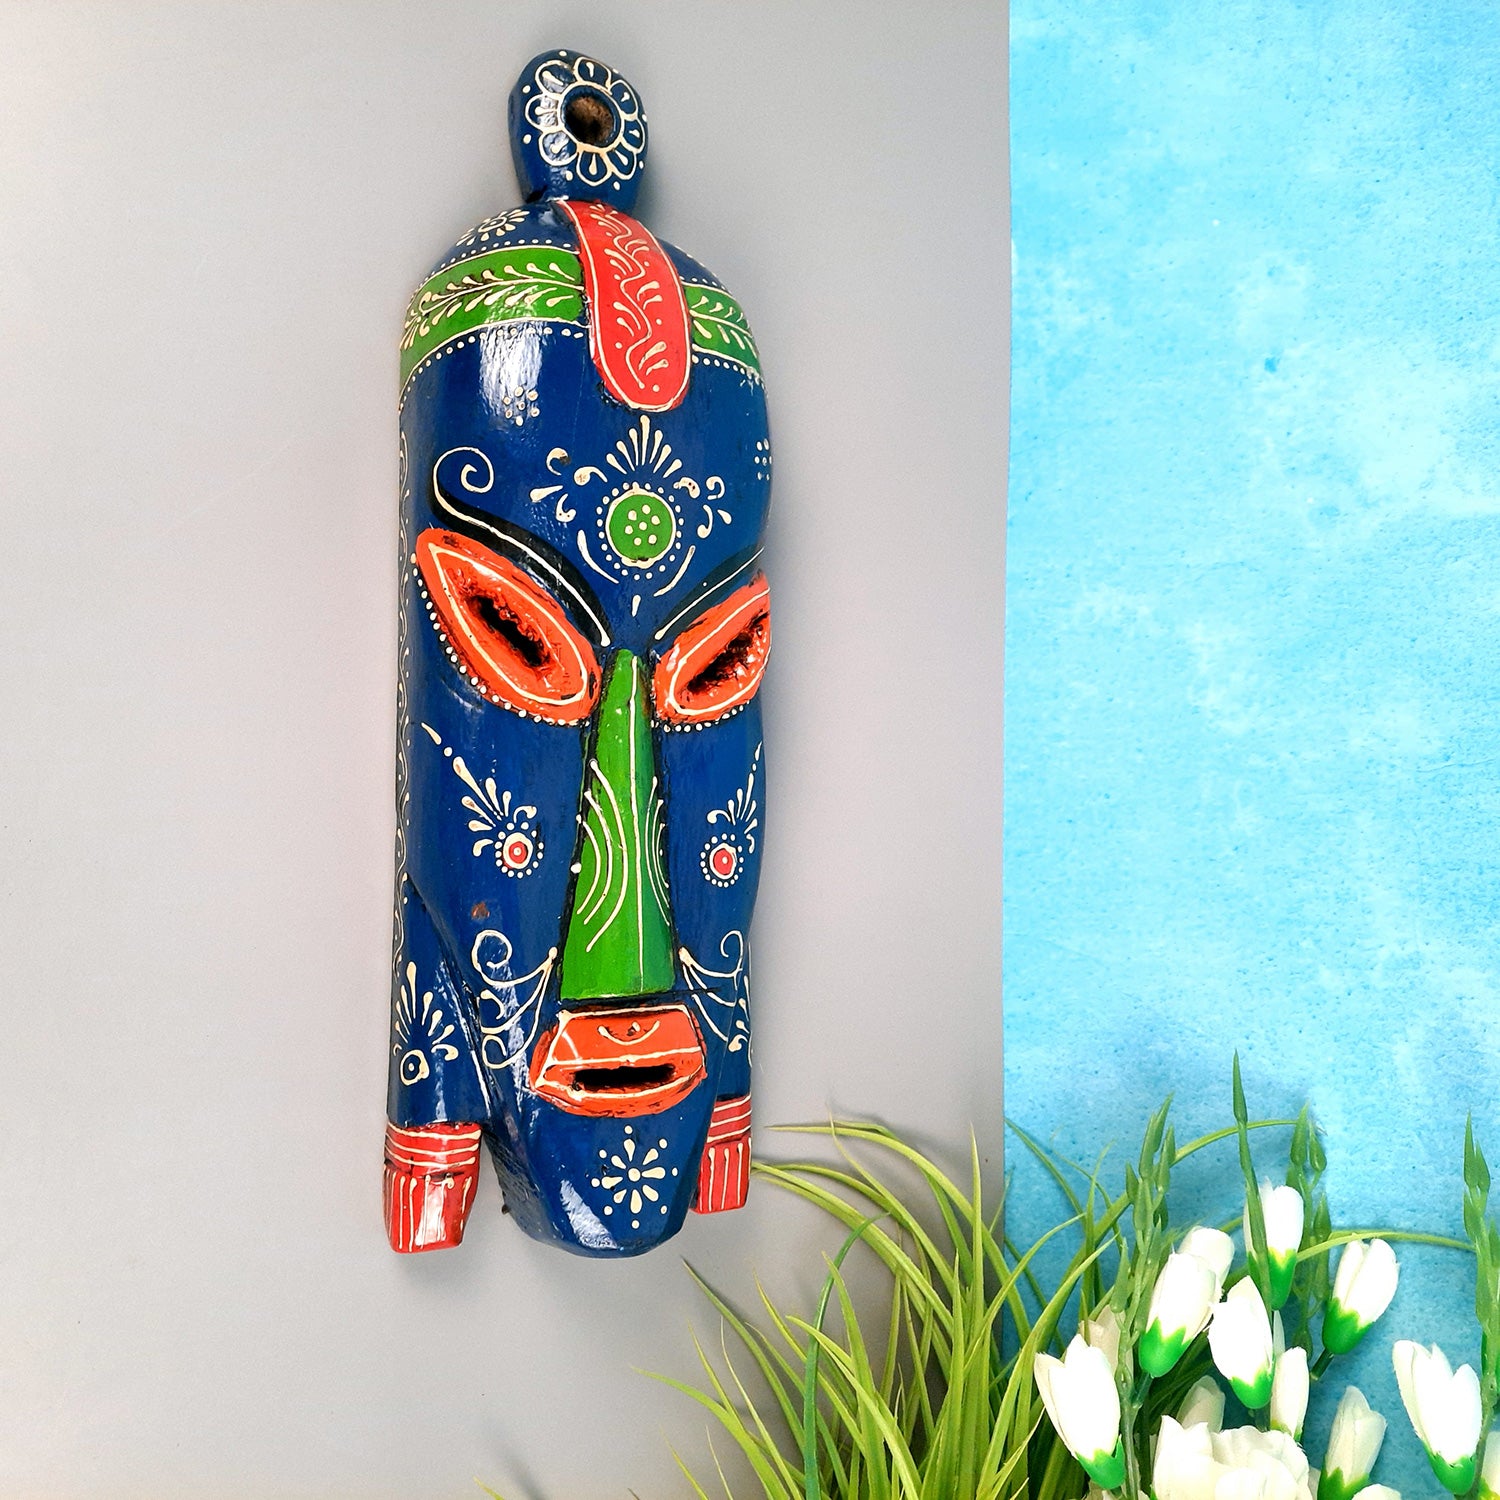 Nazar Battu Wall Mask | Tribal Face Masks Hanging |Long African Egyptian Wooden Faces Hangings - for Home Entrance, Living Room, Door Decor, Hall-Way, Balcony Decoration & Gift - 15 Inch - Apkamart